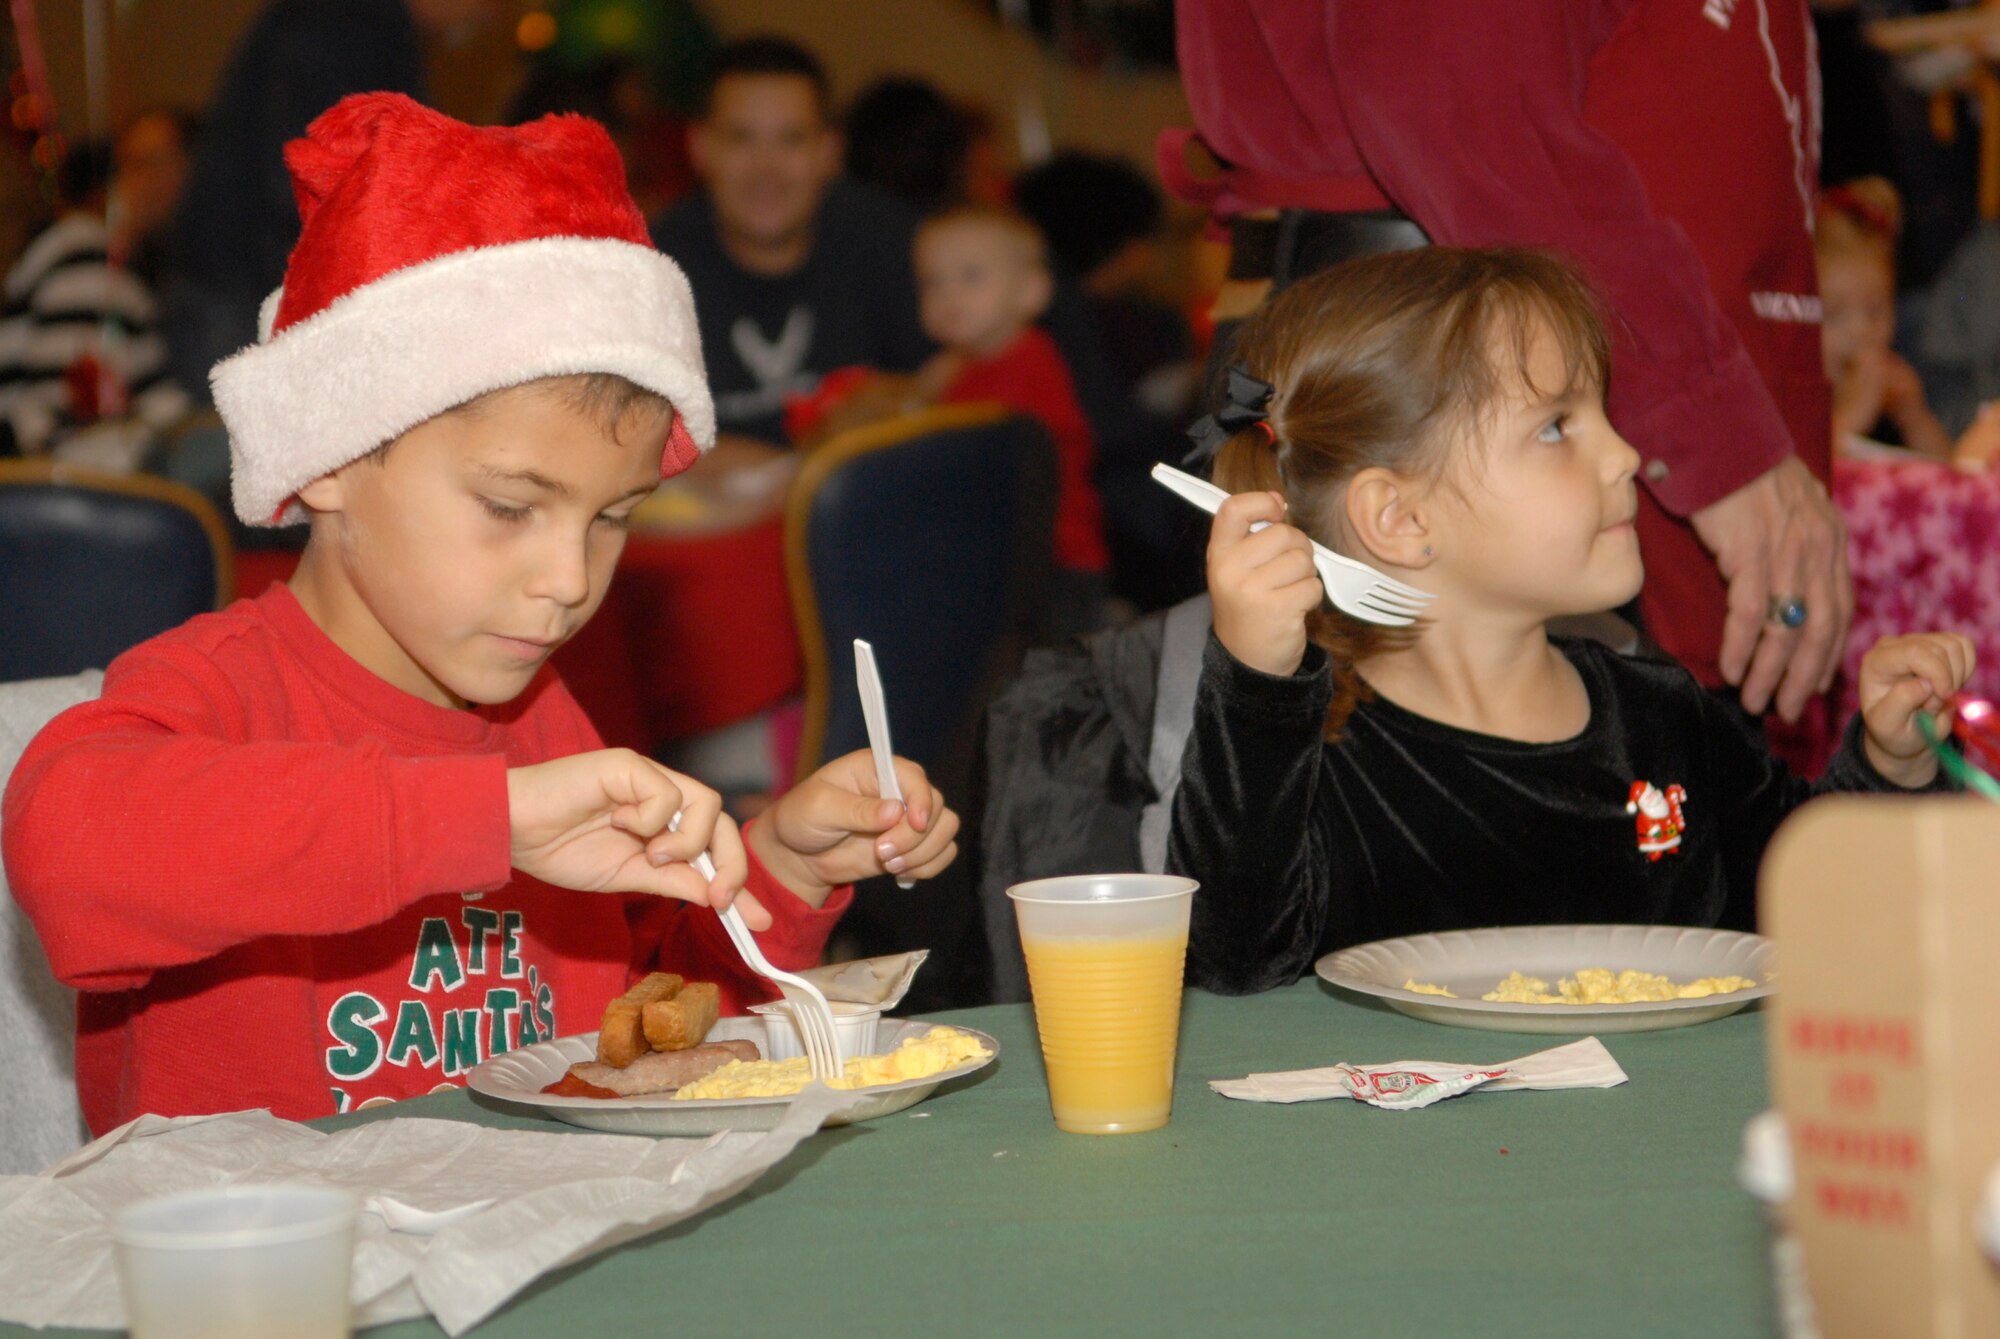 VANDENBERG AIR FORCE BASE, Calif. -- Children enjoy breakfast at the Pacific Coast Club during the Breakfast With Santa event here Saturday, Dec. 18, 2010.  Over 500 families celebrated together during the event.  (U.S. Air Force photo/Senior Airman Andrew Satran) 

 